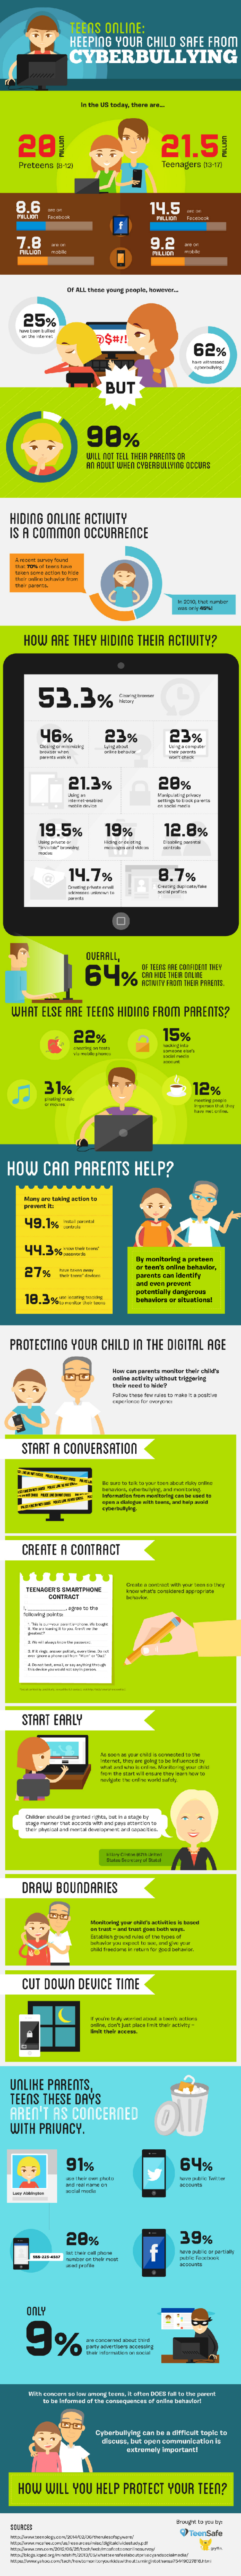 Teens online: Keeping your child safe from cyberbullying | Infographic | The Momiverse | TeenSafe